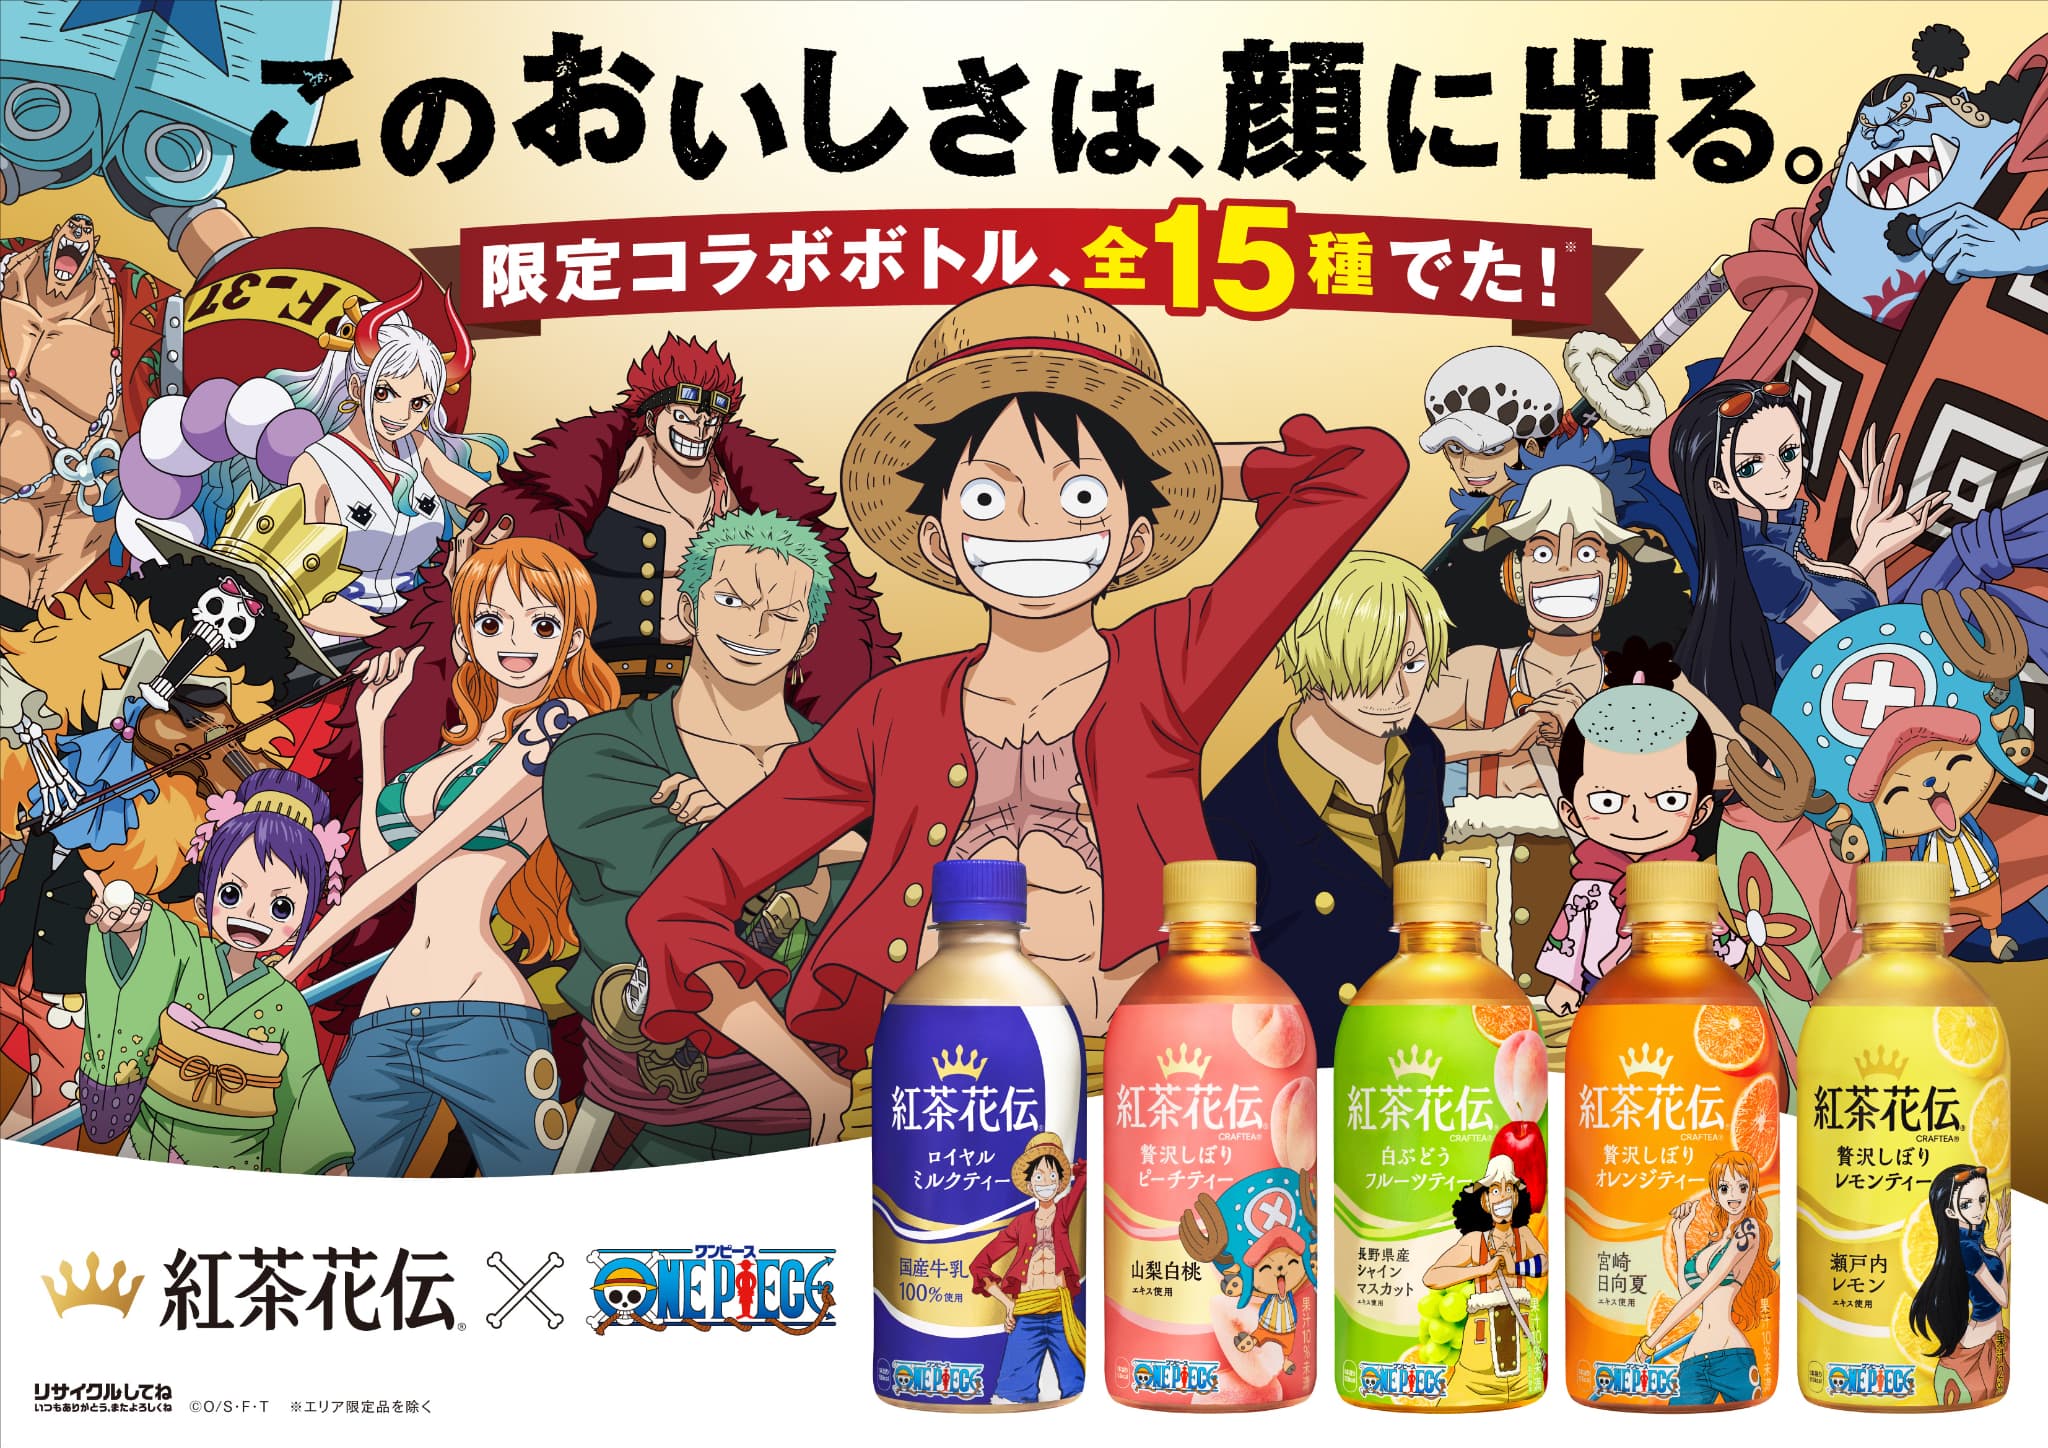 ONE PIECE 紅茶花伝　チェアセット コールマン ワンピース